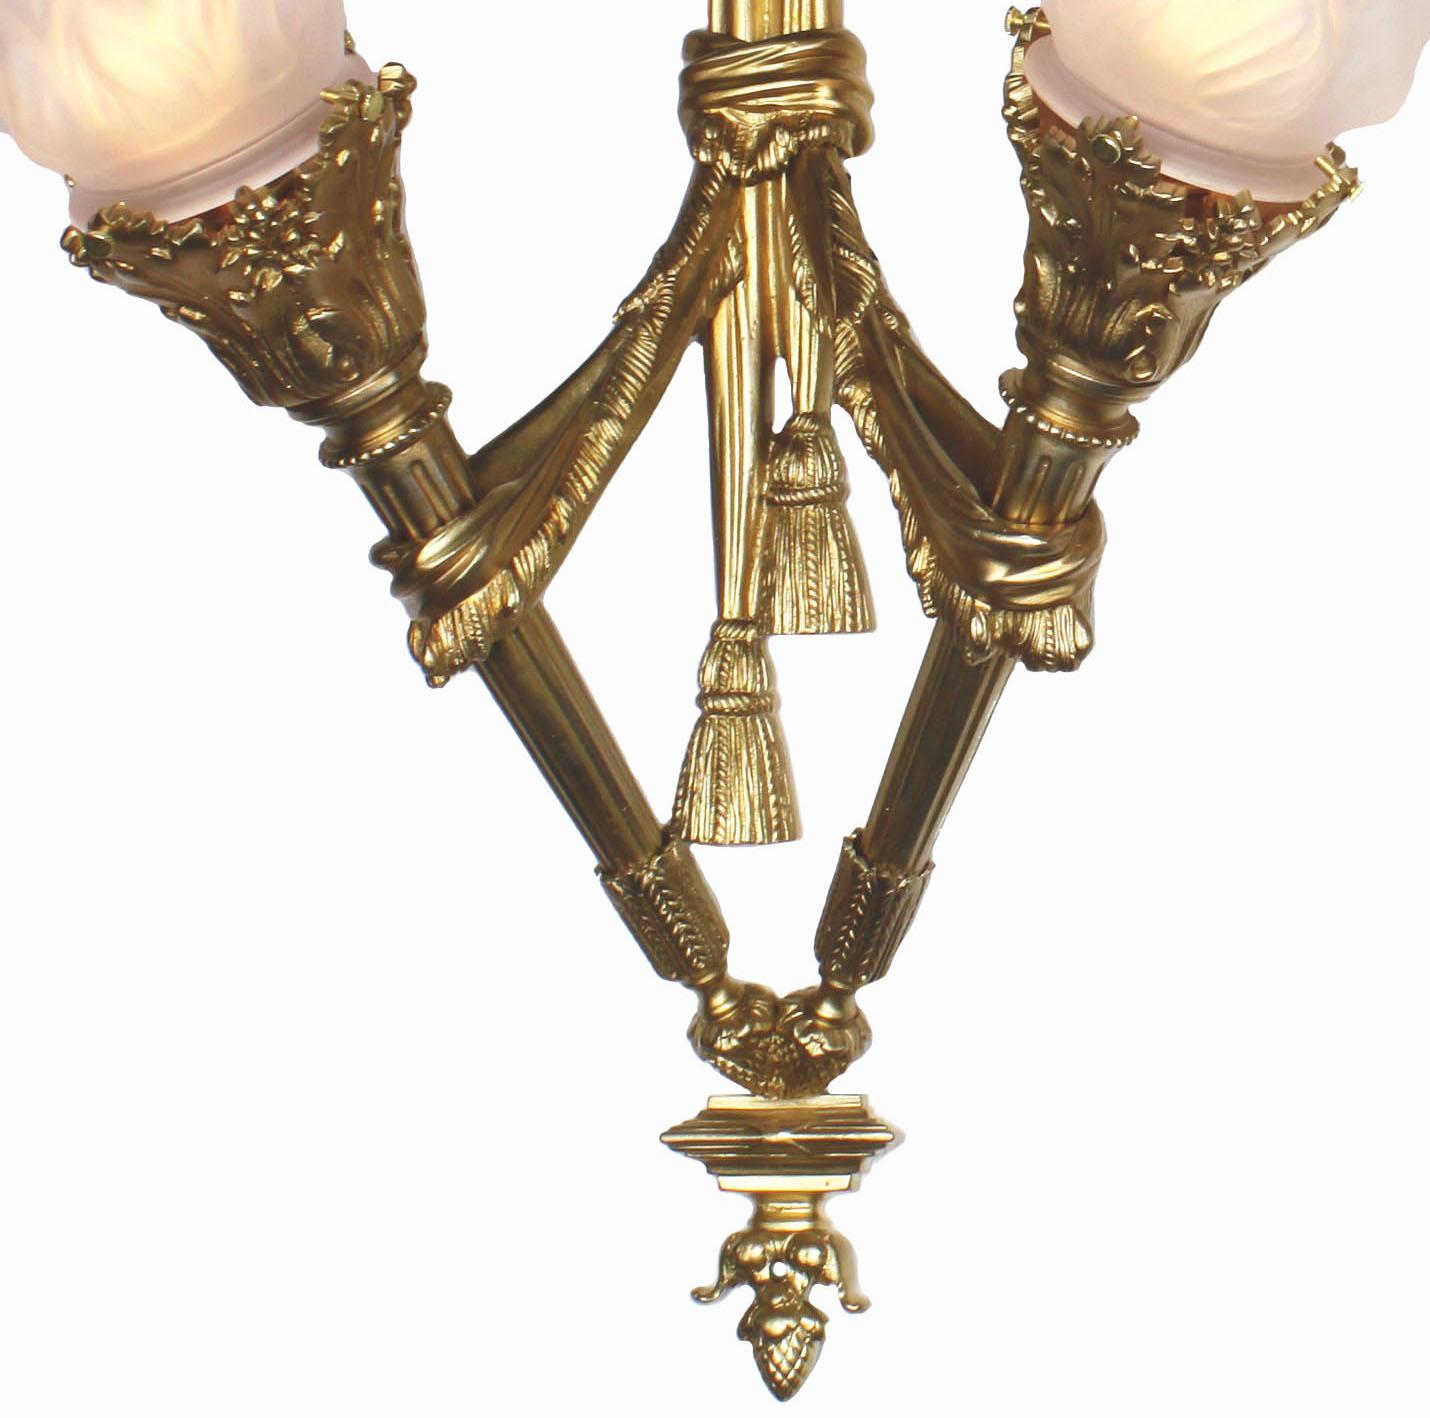 Pair of French Empire Style Gilt-Bronze Two-Light Wall Torchère Sconces In Good Condition For Sale In Los Angeles, CA